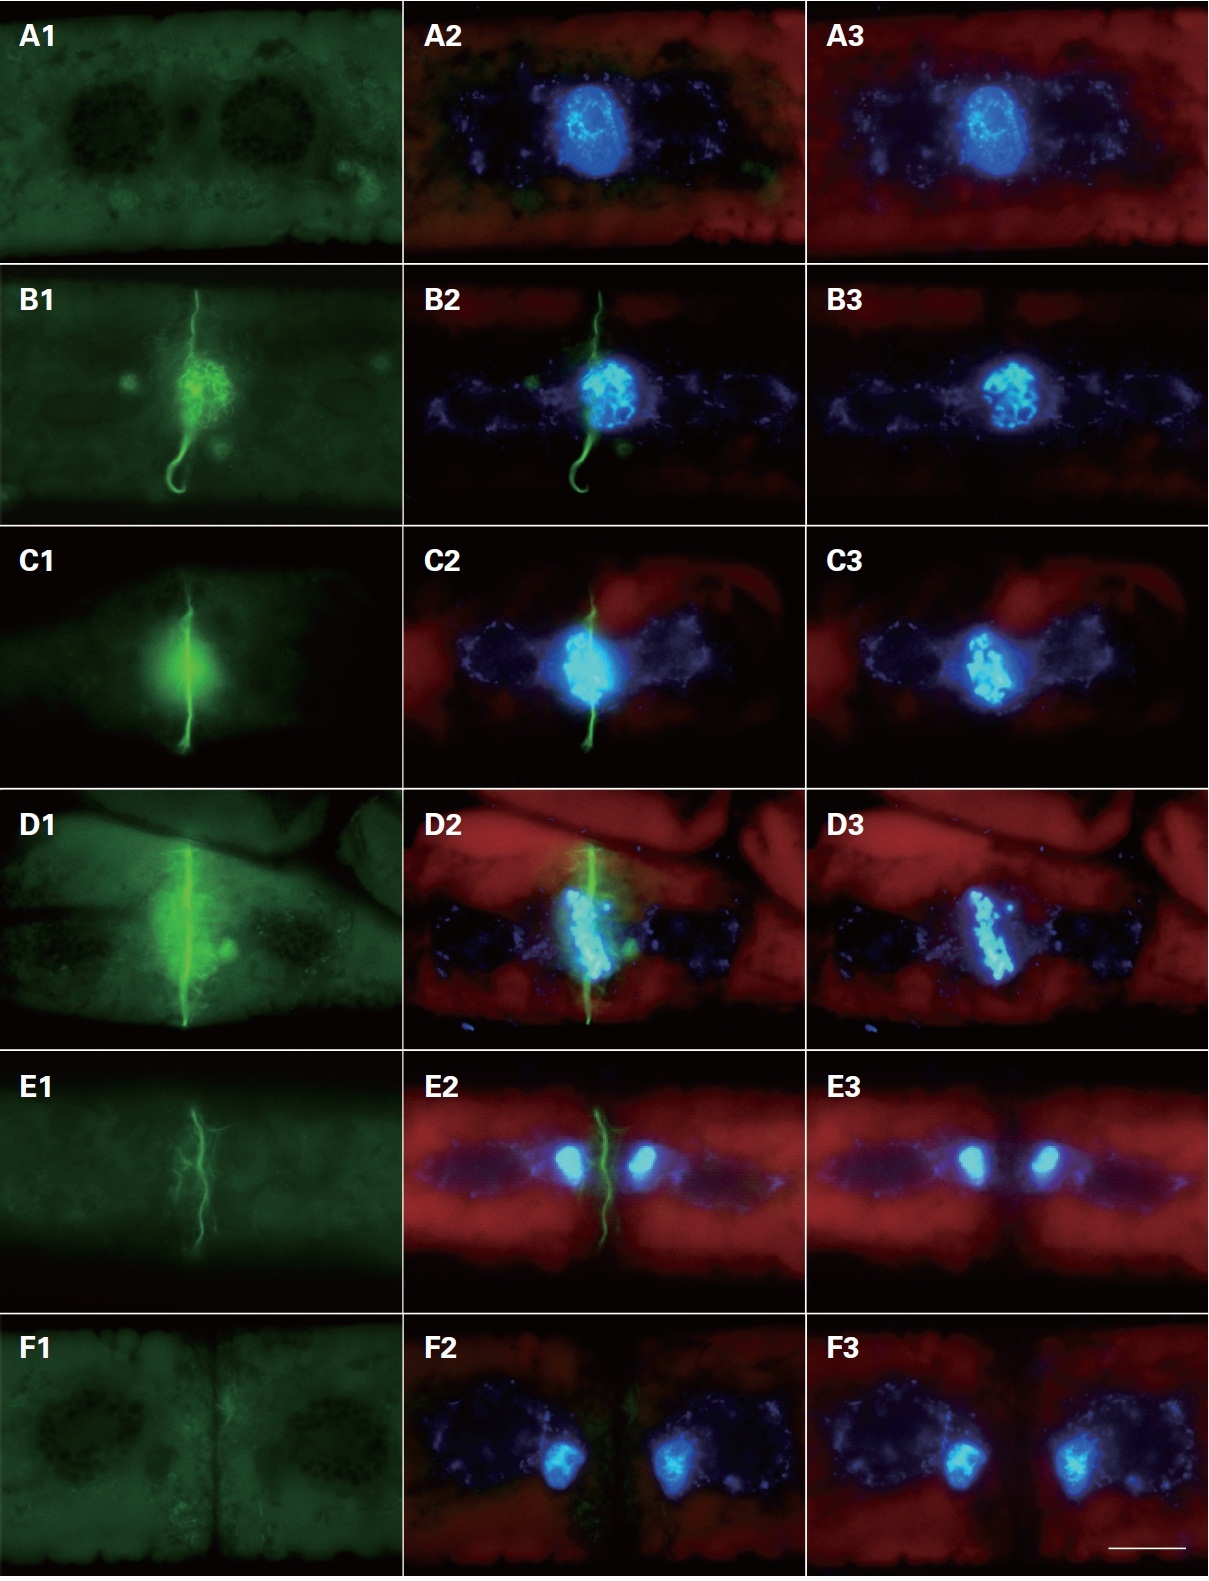 Phallacidin staining of Zygnema cruciatum actin during cell division. (A) Interphase. (B) Prophase. (C) Prometaphase. (D) Metaphase. (E) Anaphase. (F) Telophase. (A1-F1) Phallacidin stained actin filaments. (A2-F2) Merged pictures of Phallacidin stained actin filaments and DAPI stained nucleus. (A3-F3) DAPI stained nuclei. Scale bar represents: 10 ㎛.